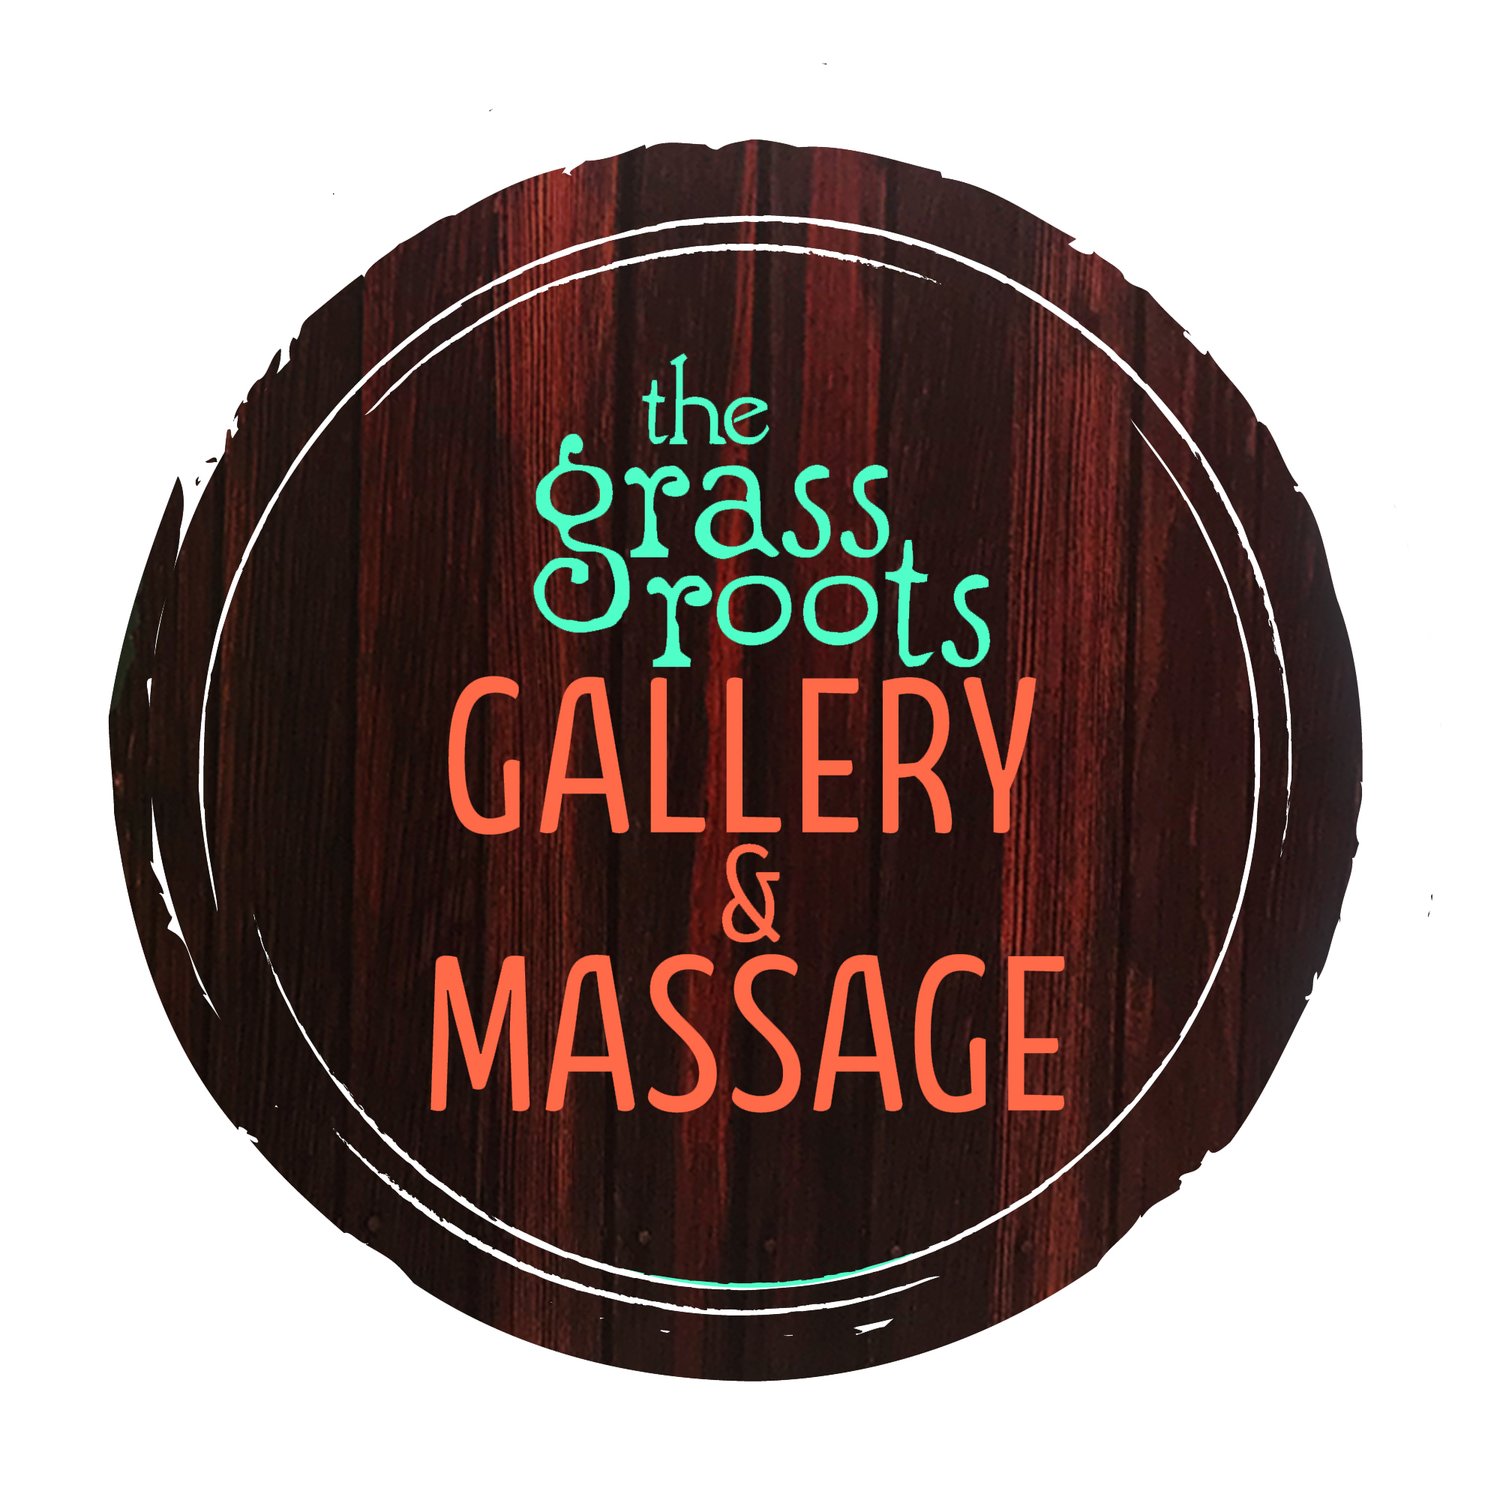 The Grassroots Gallery & Massage